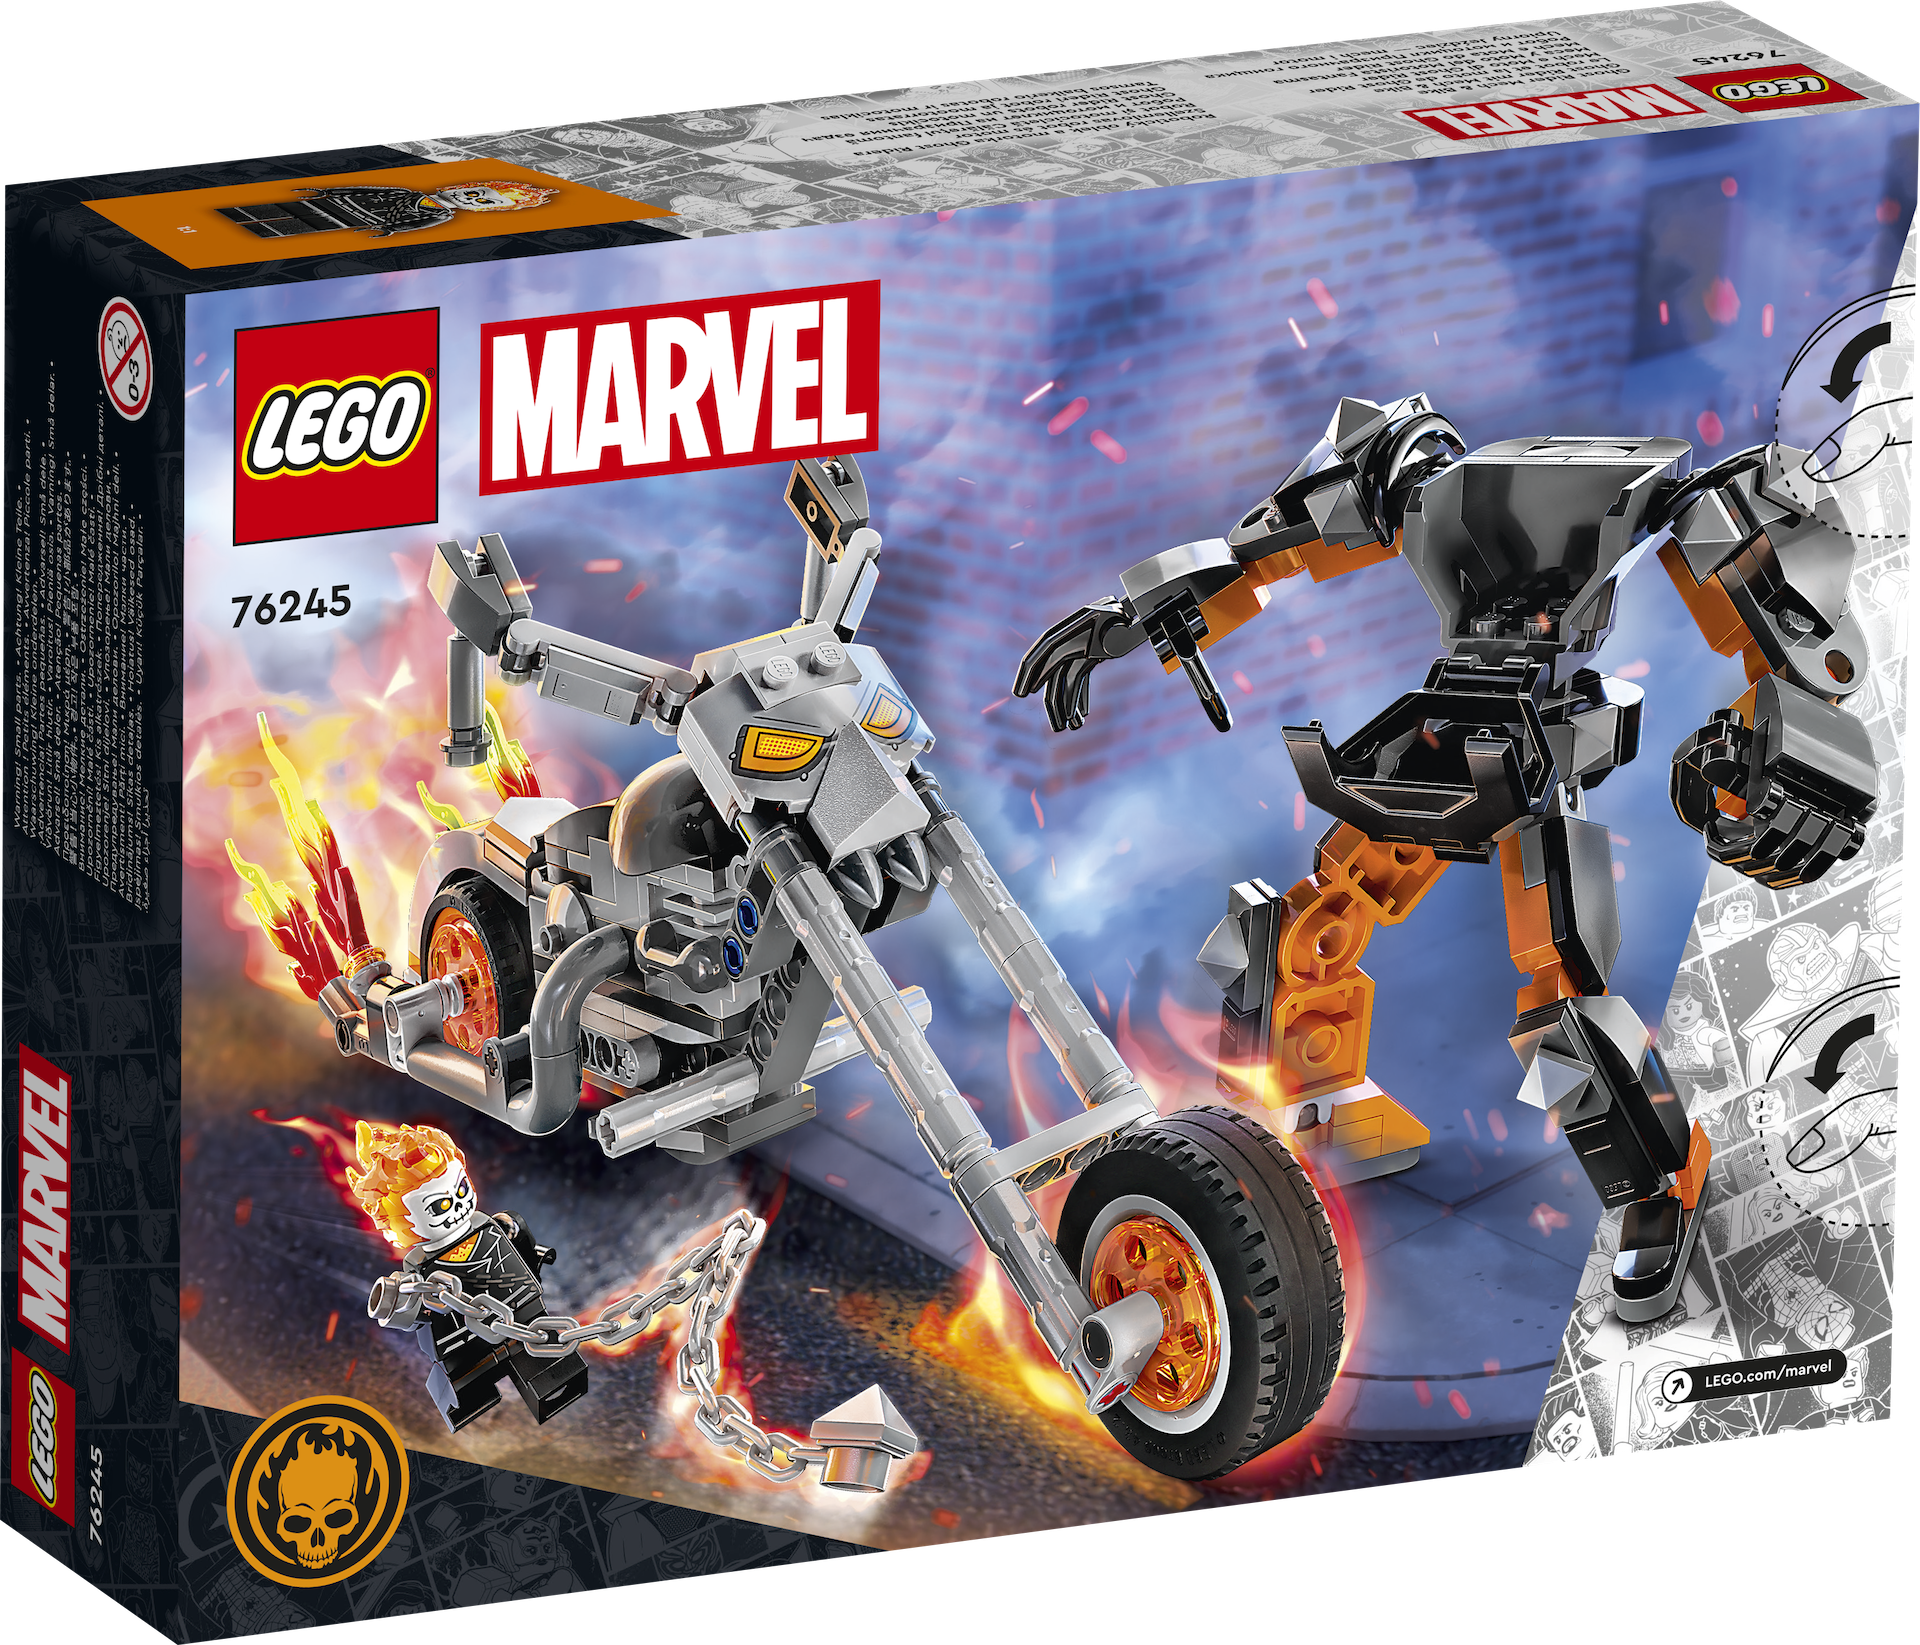 LEGO Marvel sets for January 2023 revealed with new Hulkbuster, Quinjet,  Morbius, and more [News] - The Brothers Brick